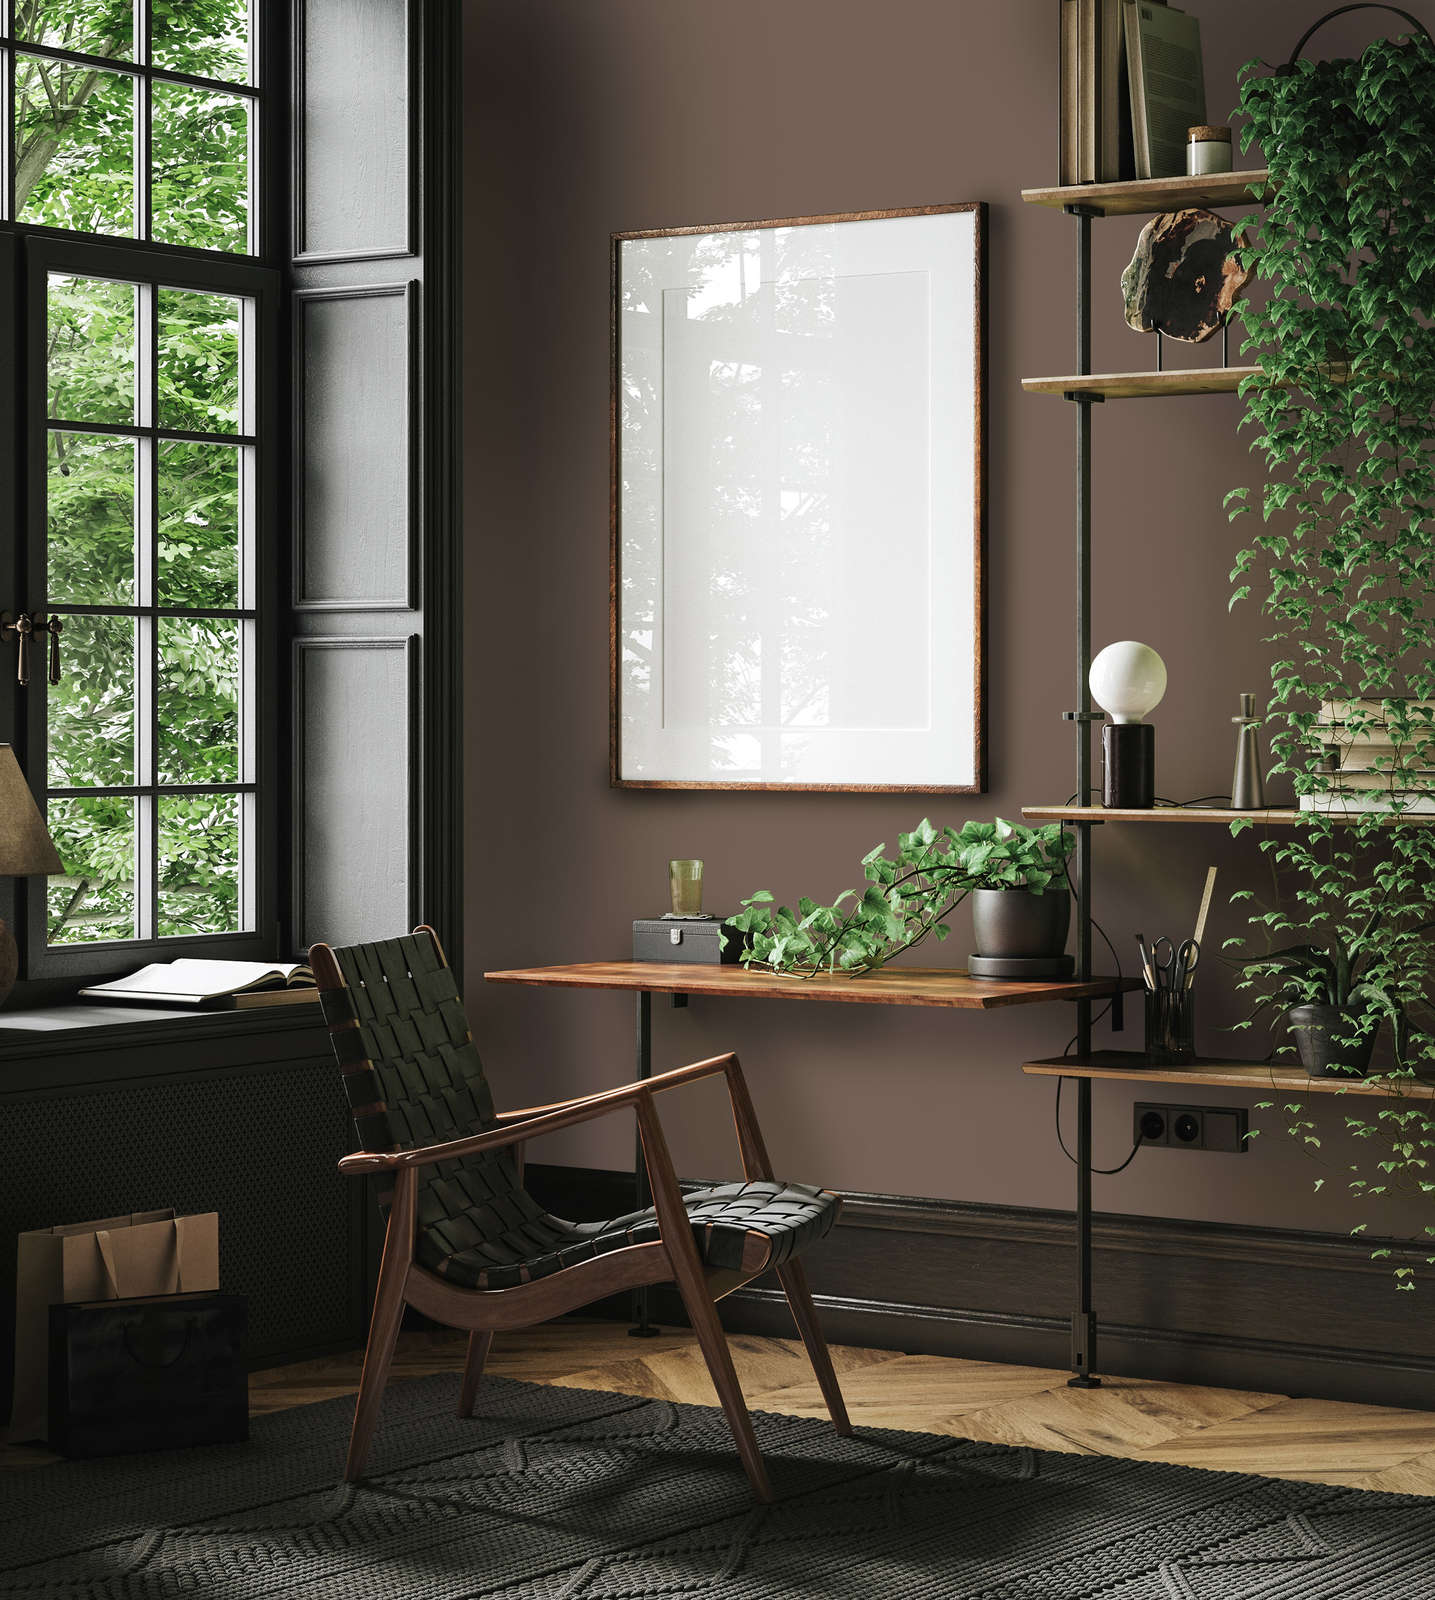             Premium Wall Paint down-to-earth maroon »Modern Mud« NW721 – 5 litre
        